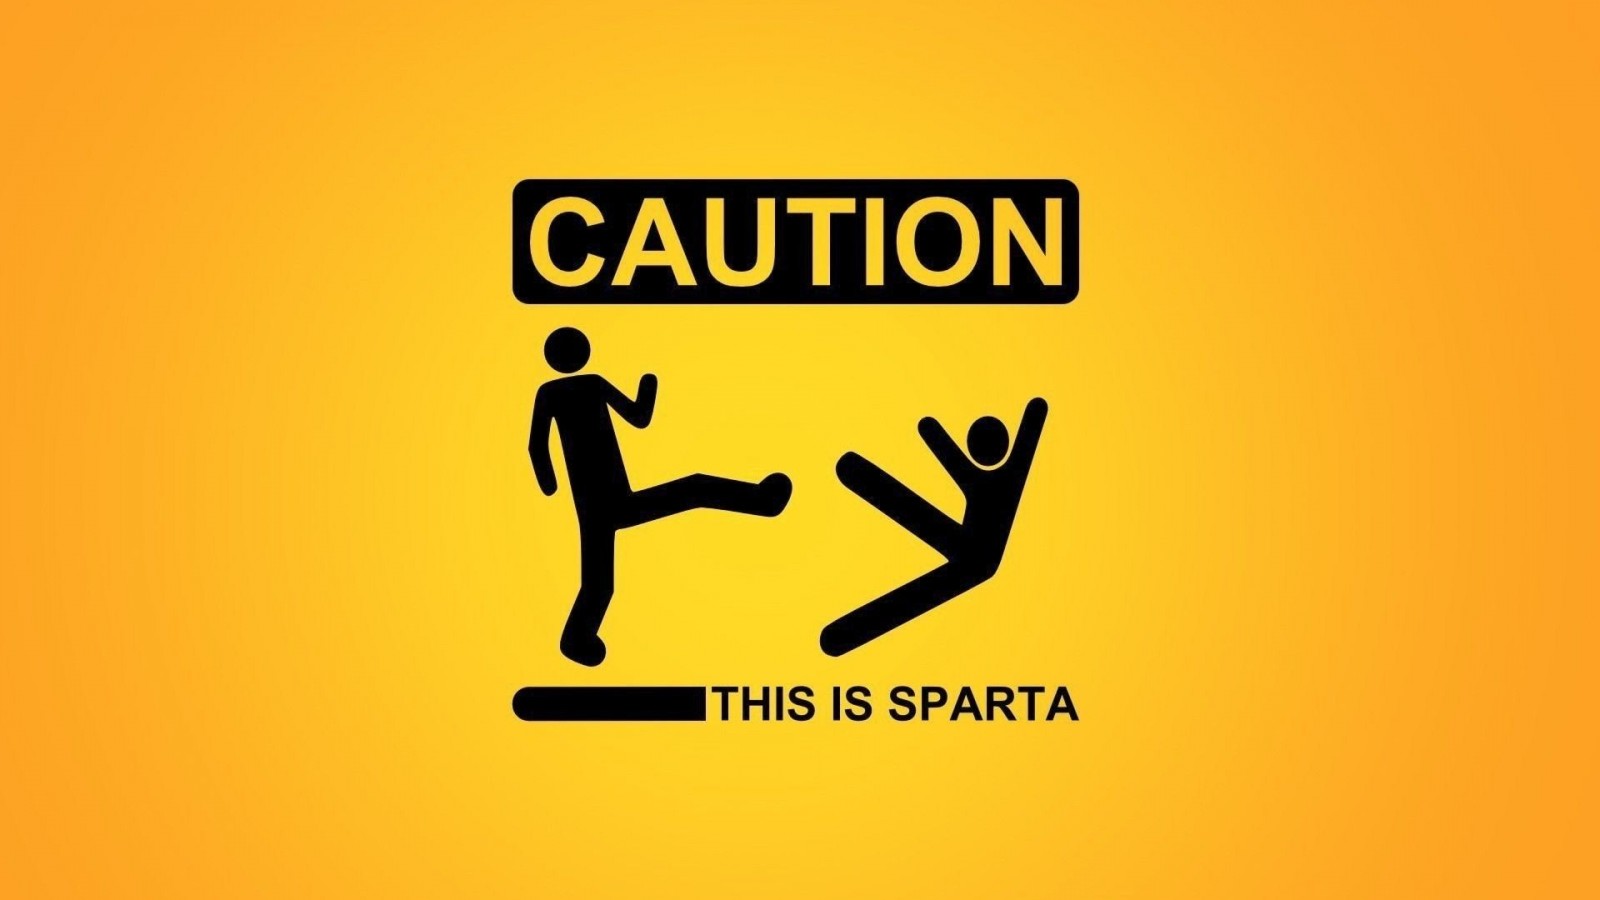 Caution Sign This Is Sparta IwallHD Wallpaper HD